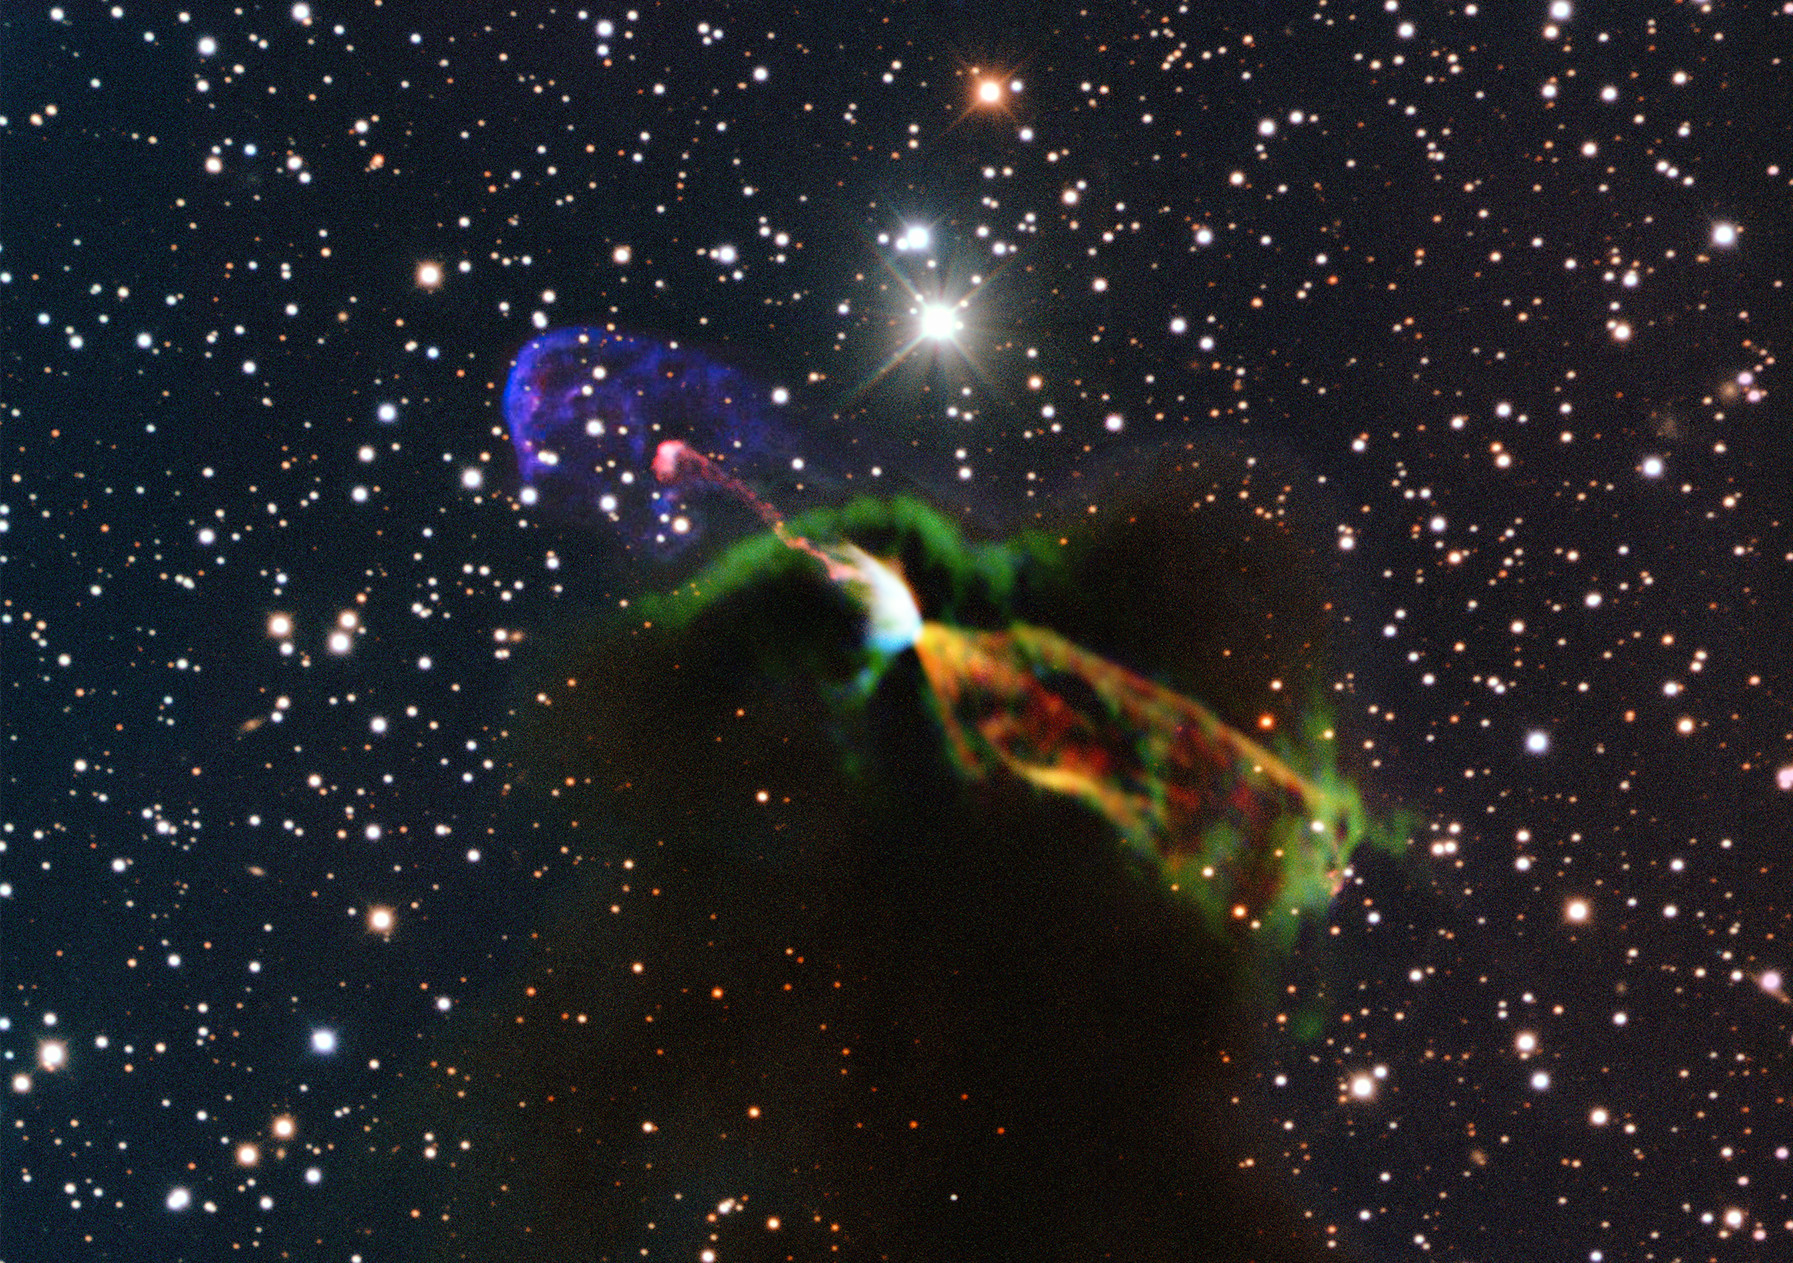 A dark cloud blocks out background stars. Infront, two jets of material shoot in opposite directions from a central object